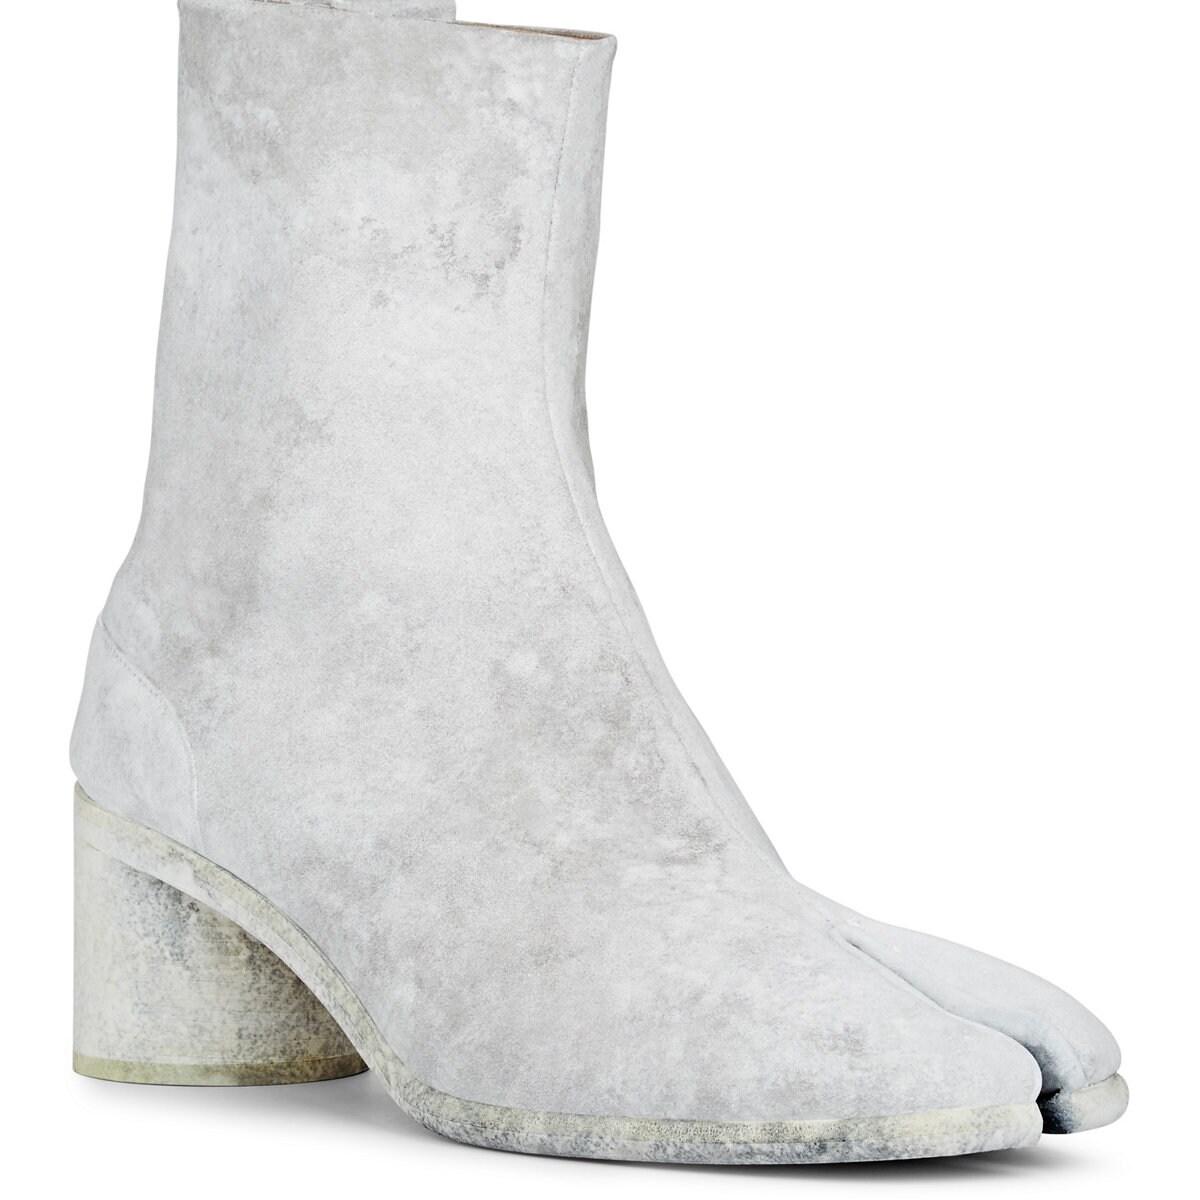 Maison Margiela Tabi Painted-leather Boots in White for Men - Lyst